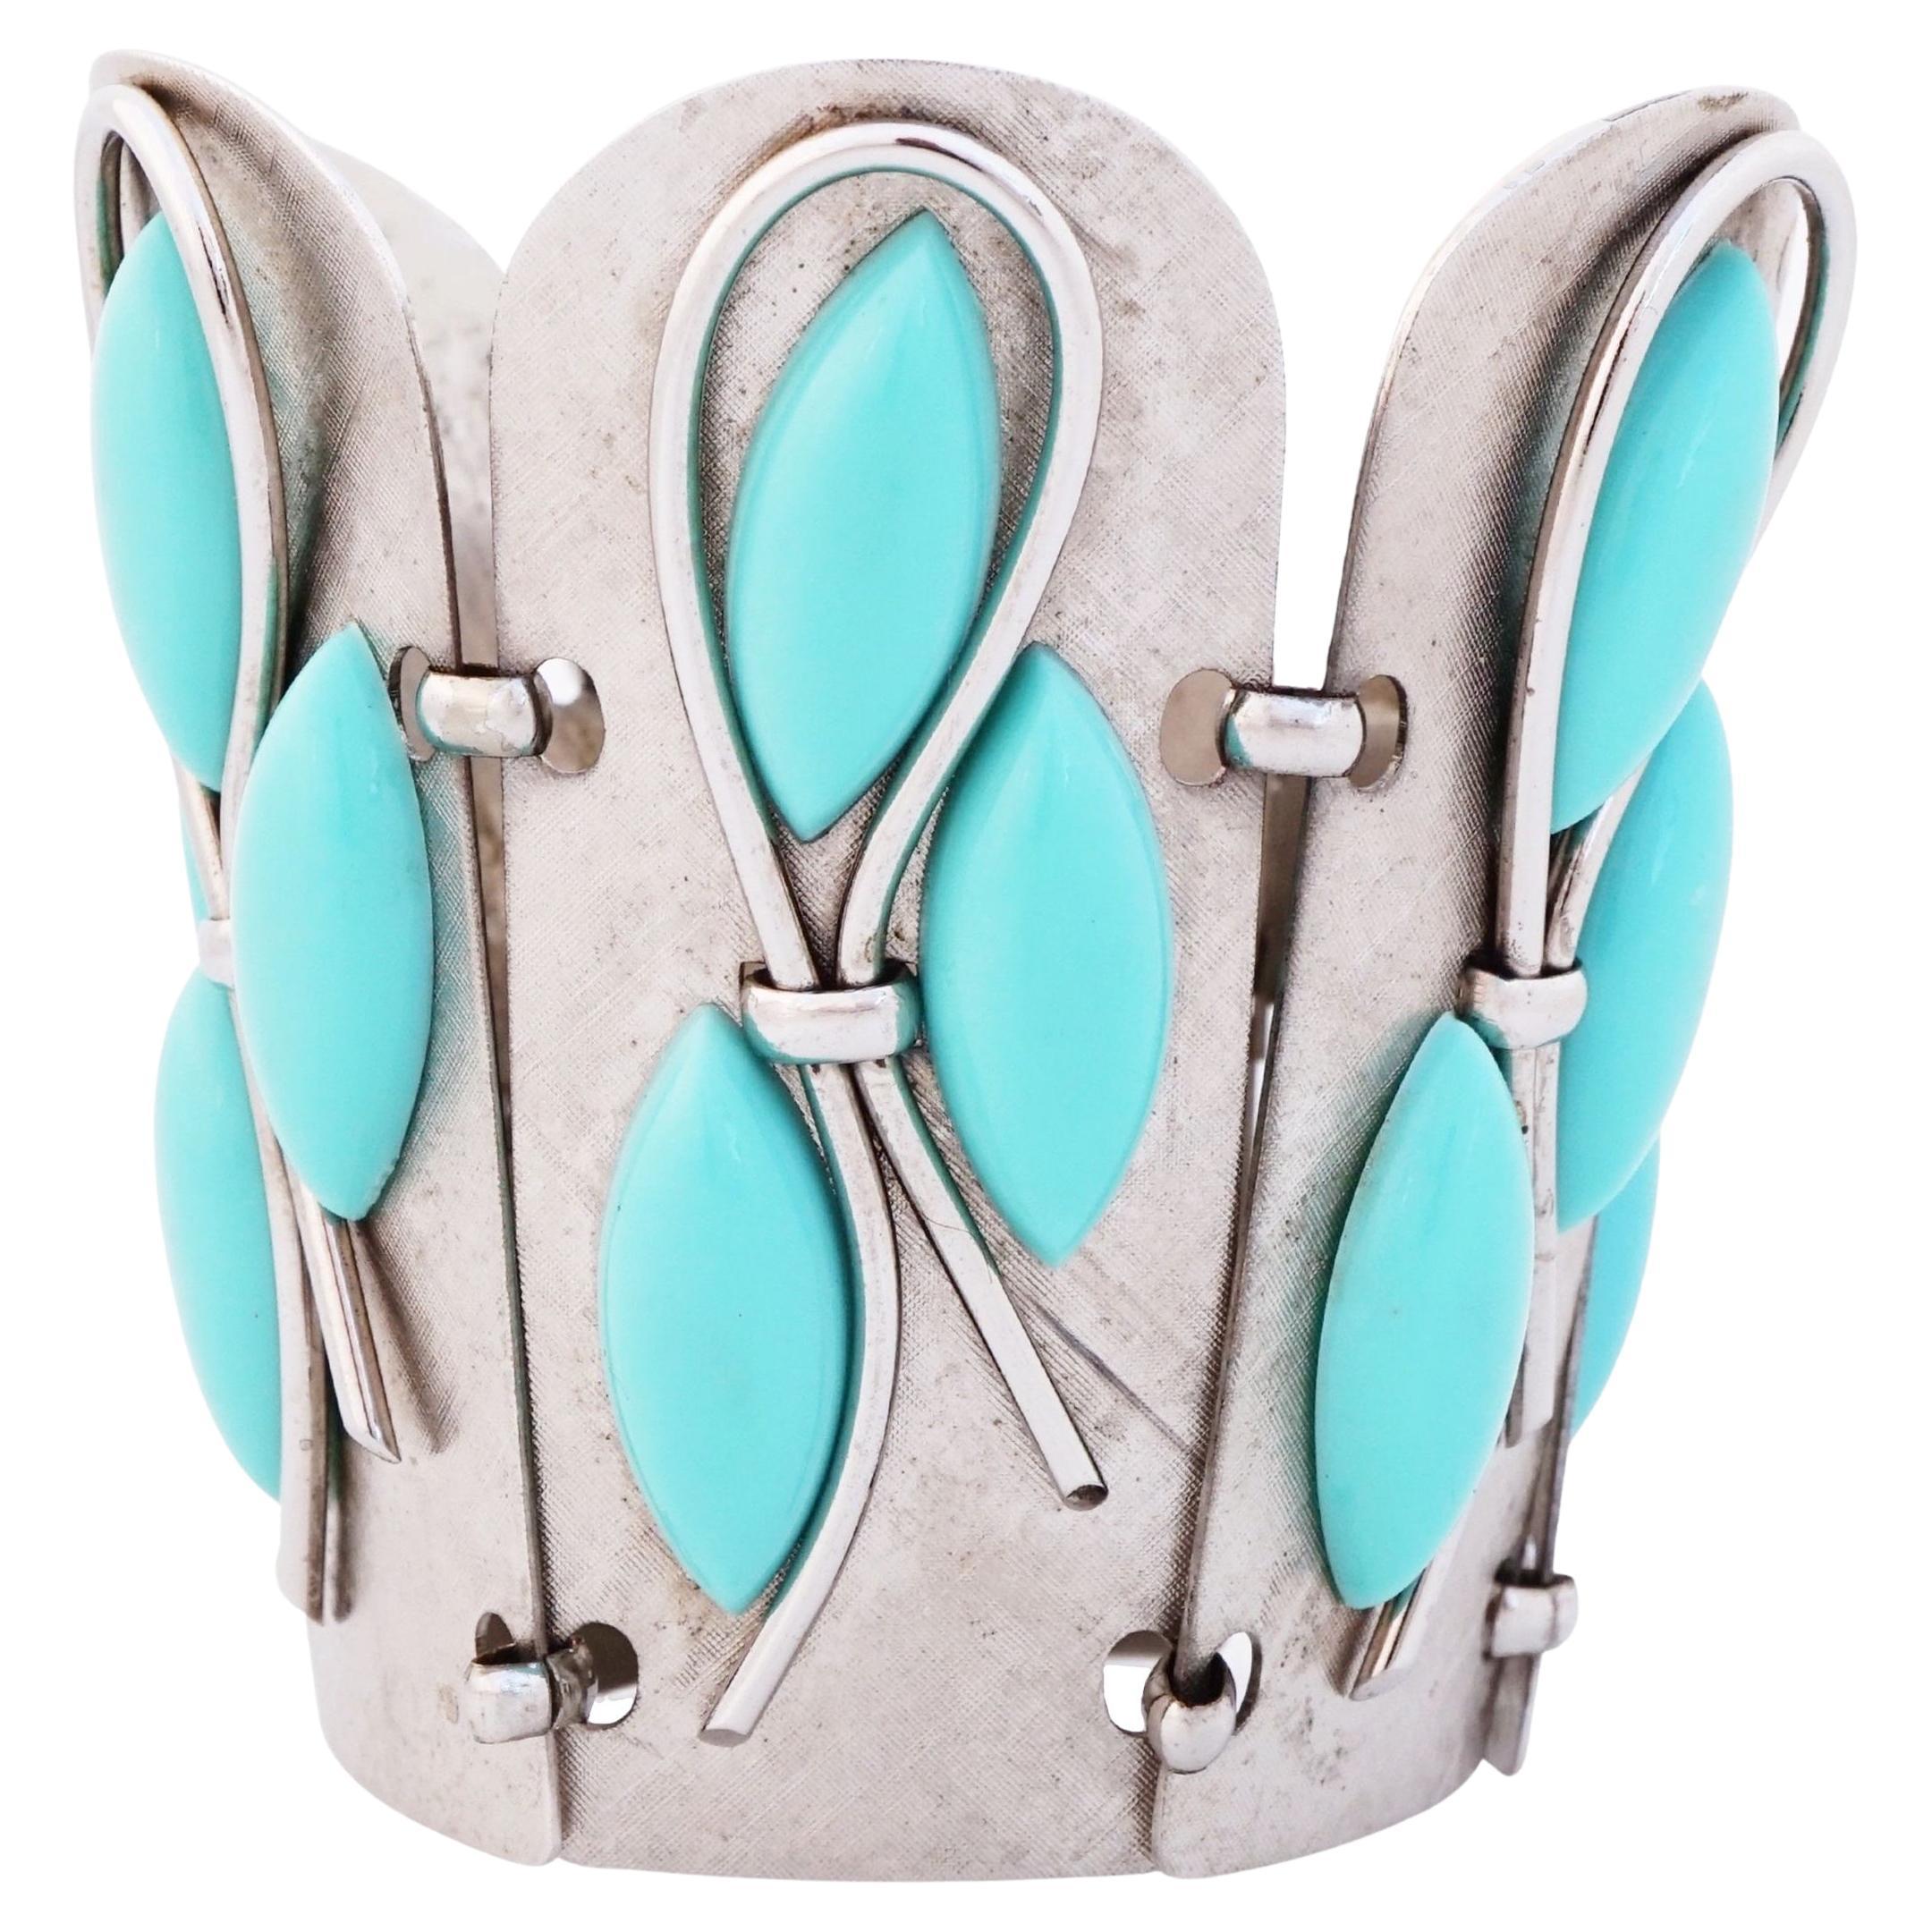 Silver Link "Gauntlet" Cuff Bracelet With Turquoise Cabochons By Napier, 1950s For Sale